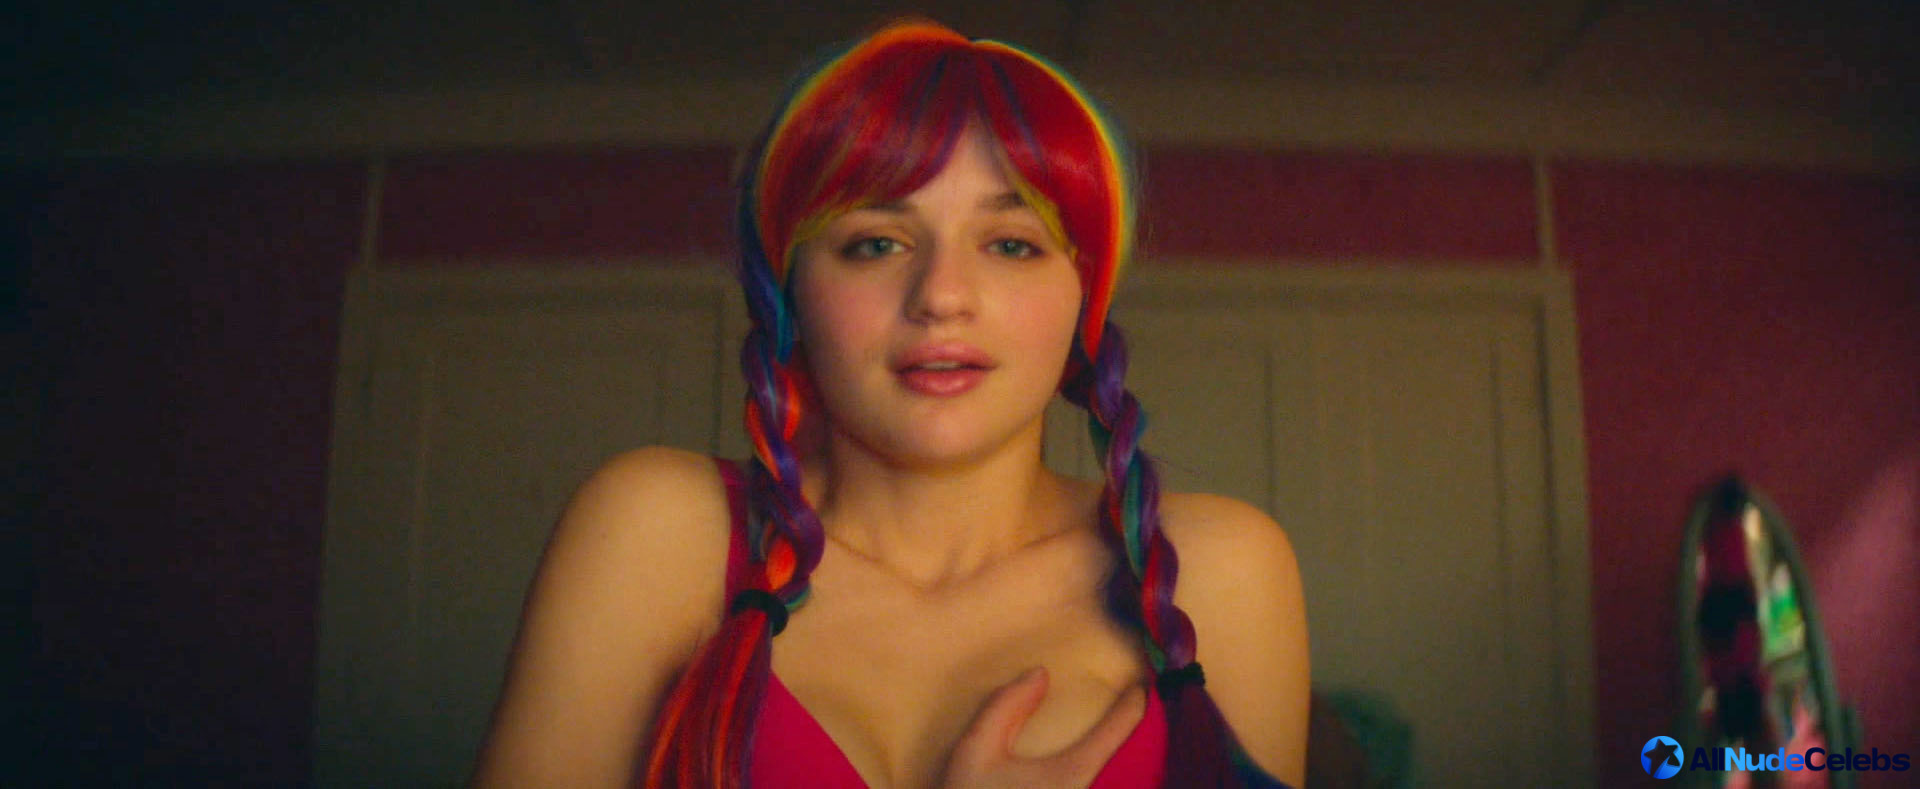 Joey King nude and lingerie scenes.